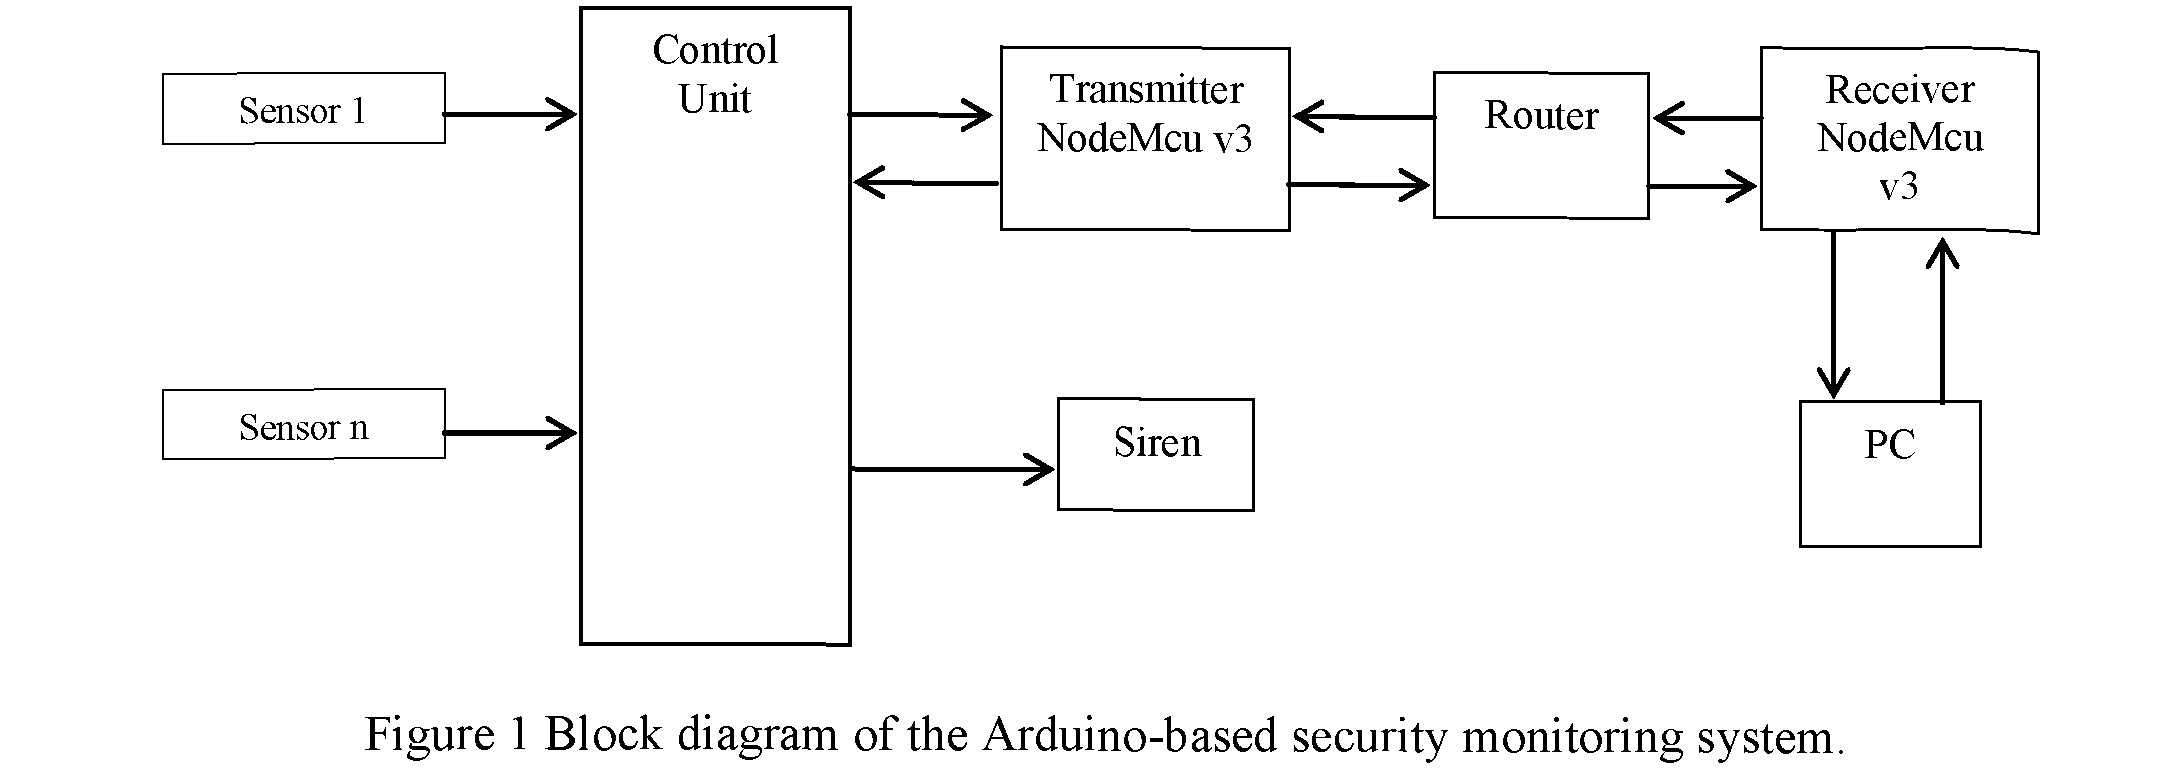 Arduino-BAsed wireless security monitoring system